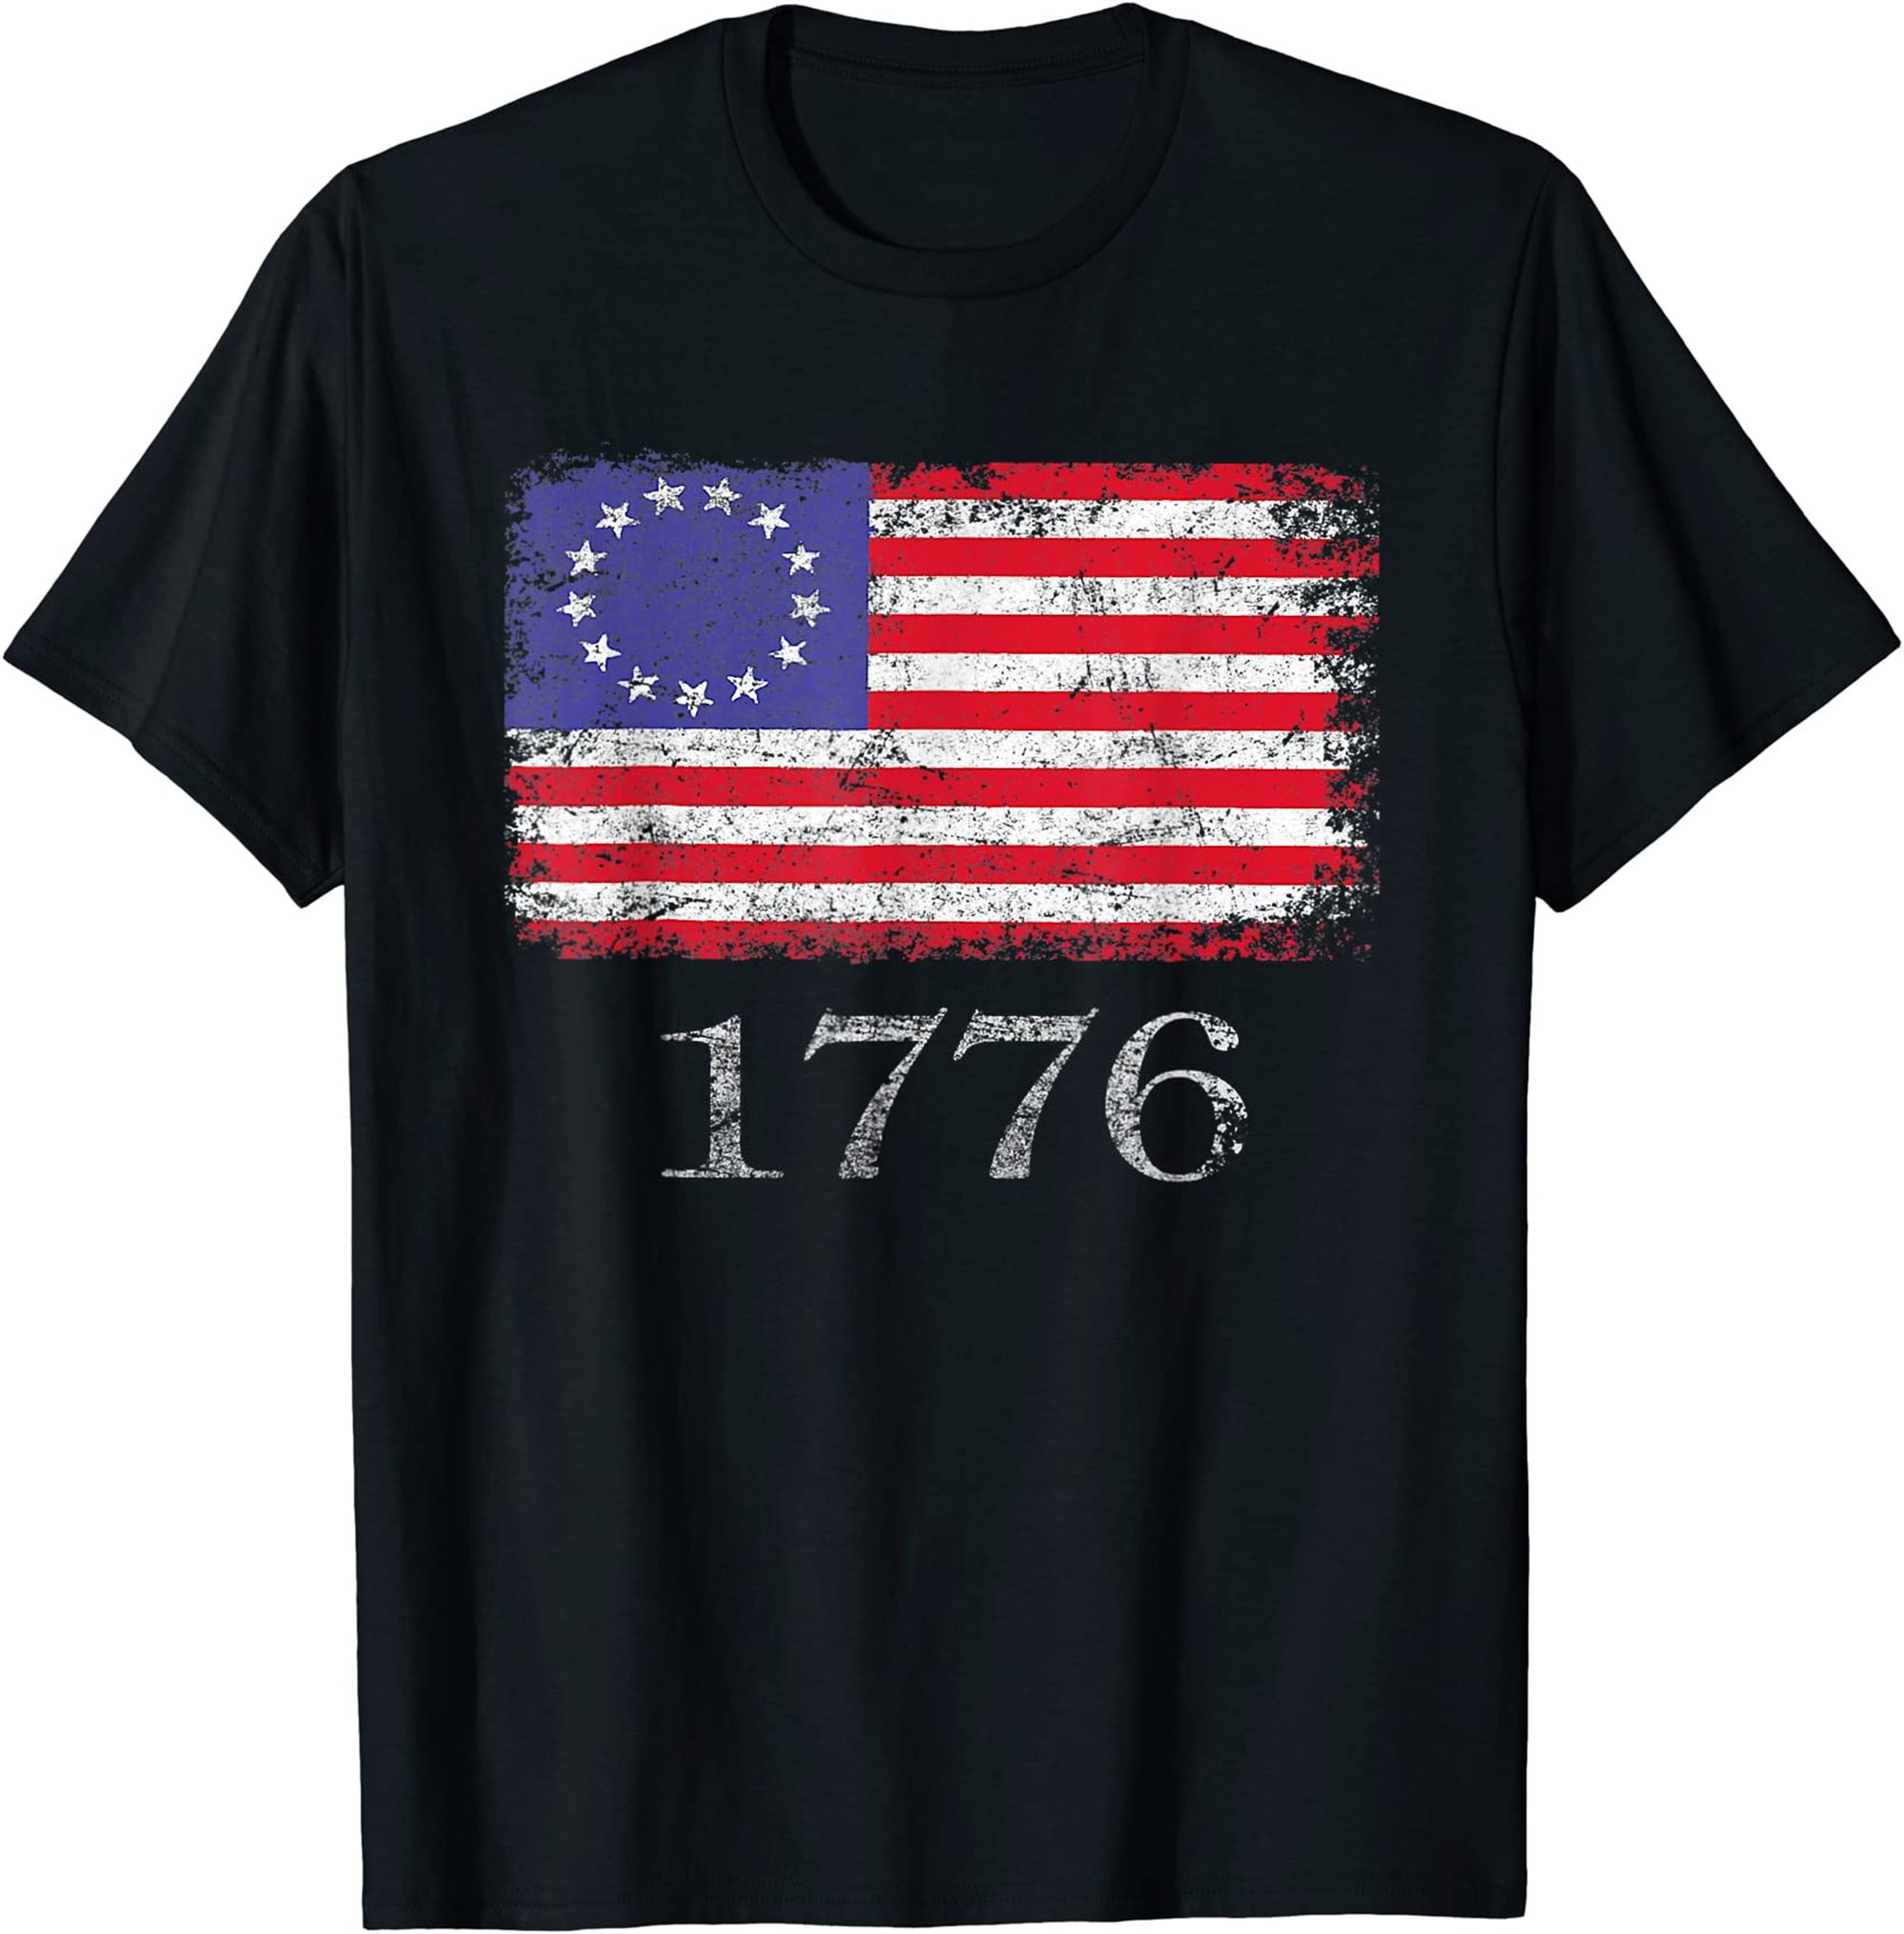 4th Of July T Shirt American Flag Betsy Ross 1776 Men Women T-shirt Plus Size Up To 5xl